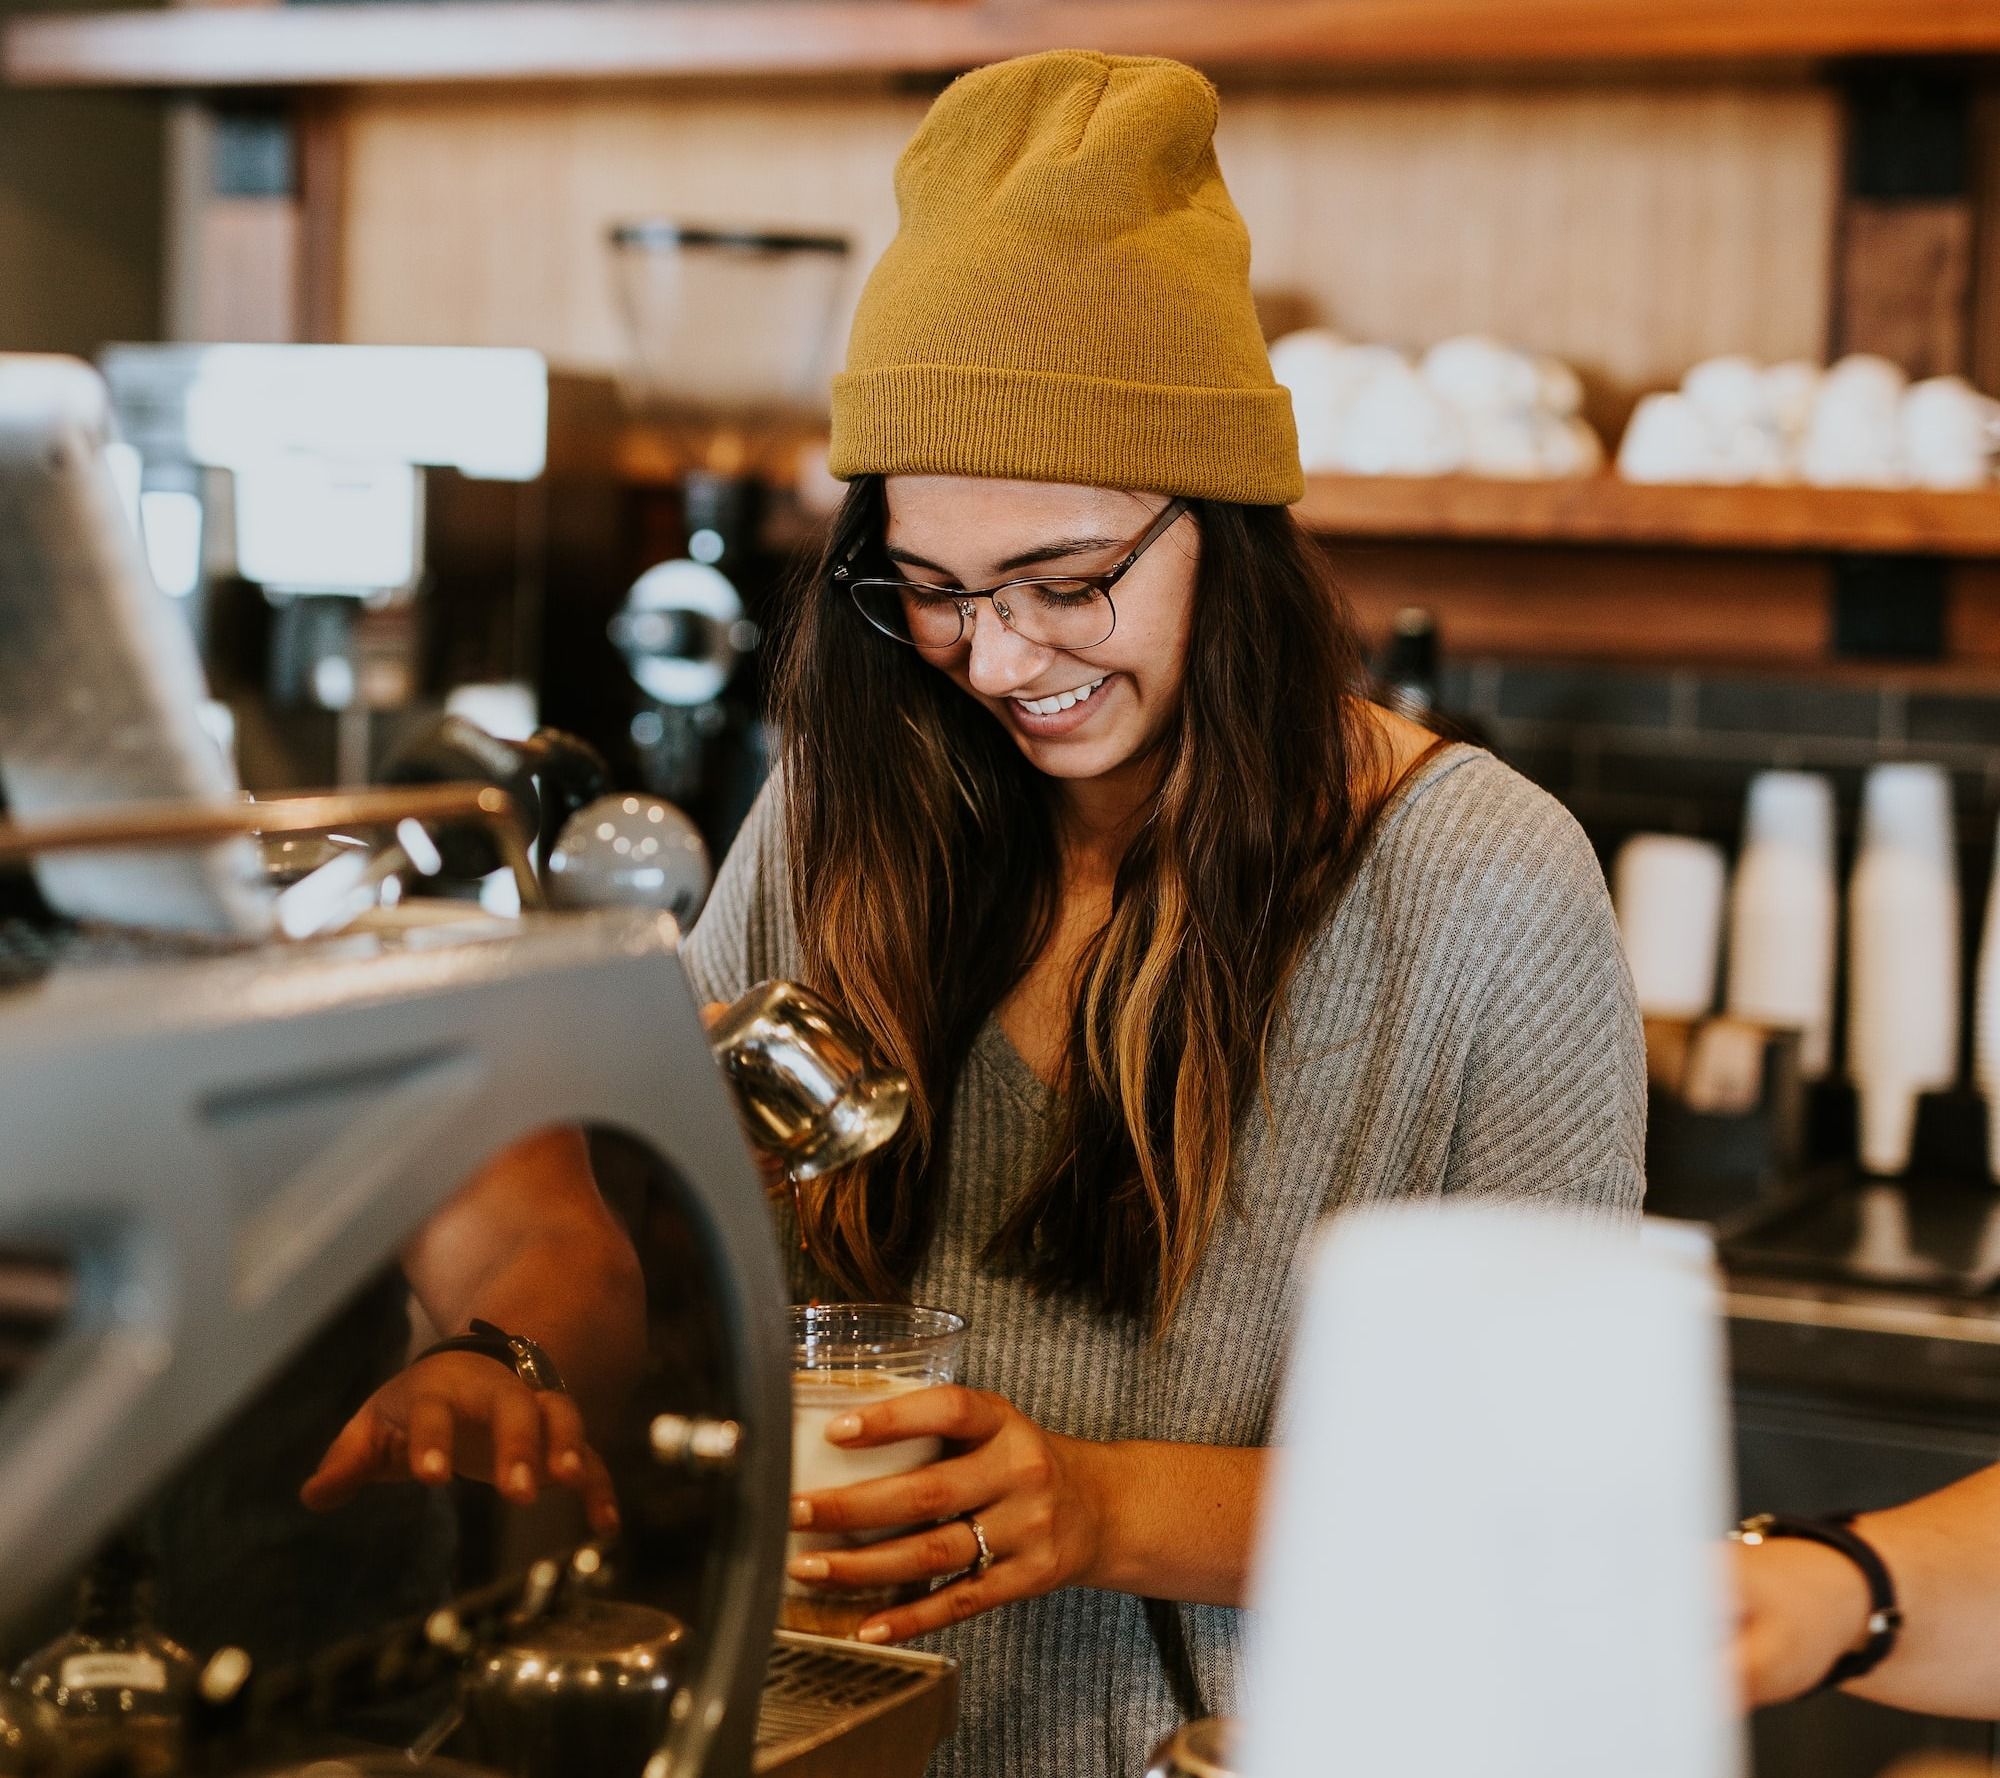 Barista smiling and pouring coffee at a coffee shop.